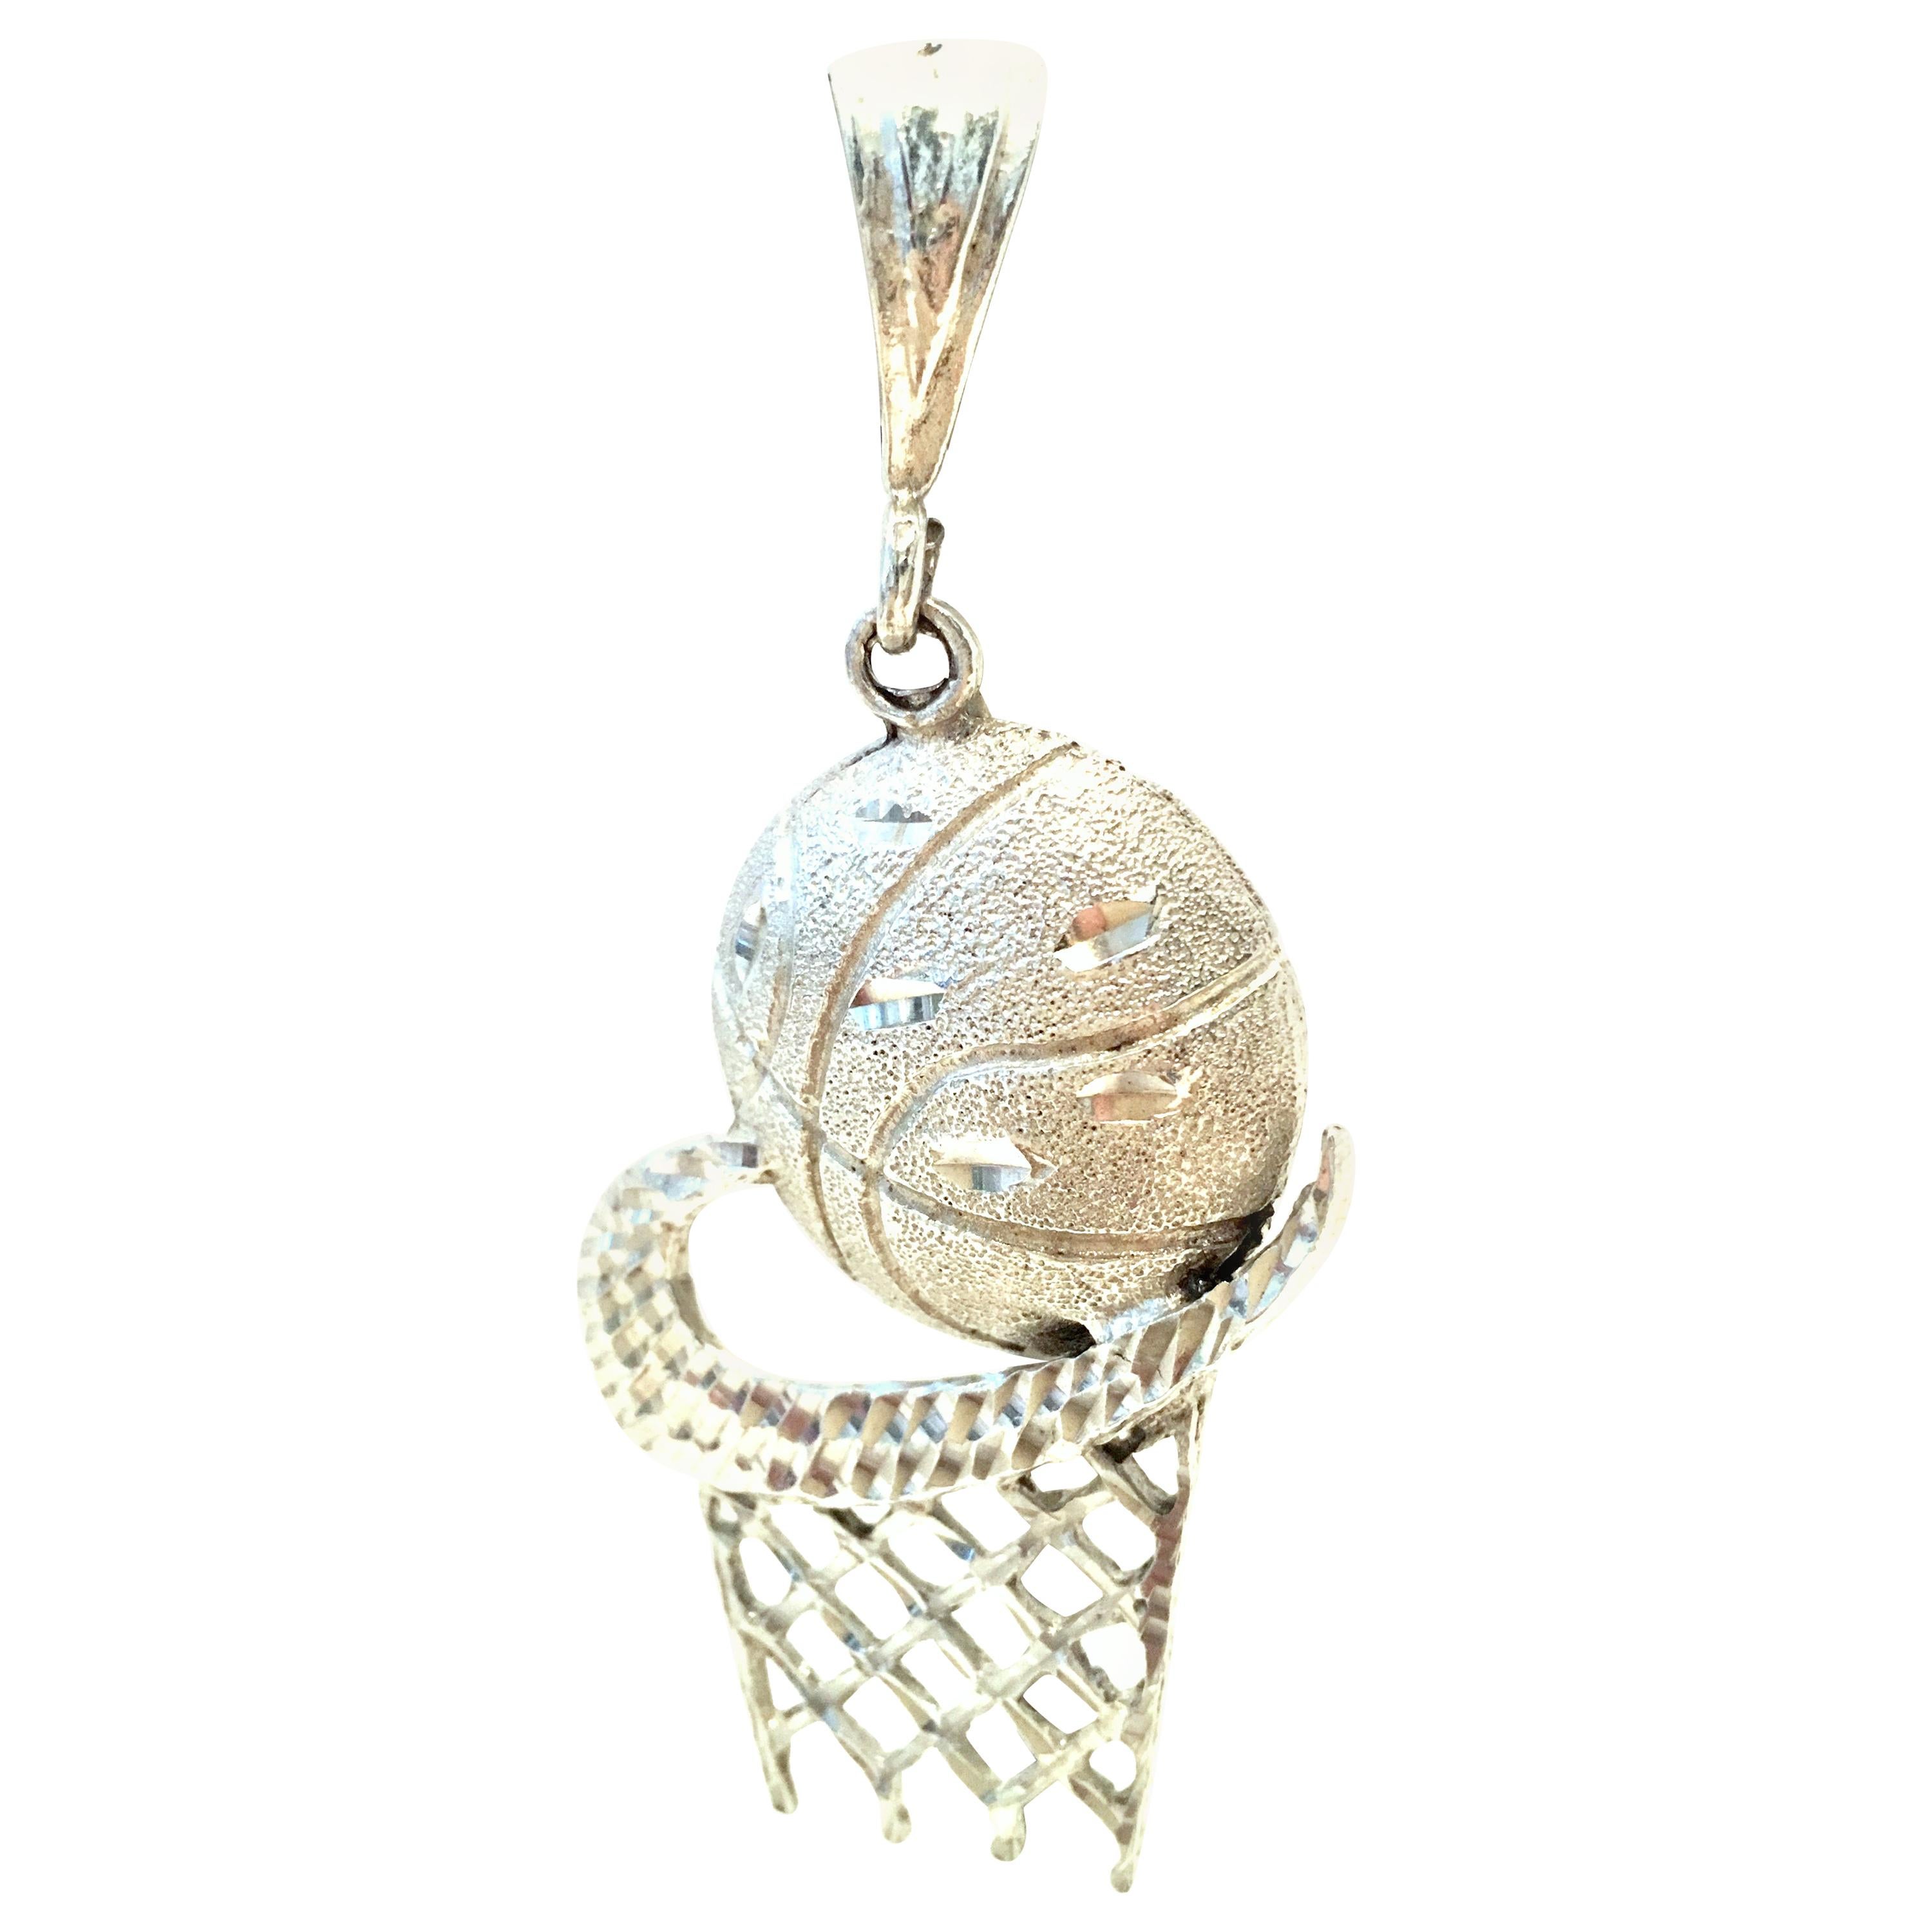 21st Century Italian 925 Sterling Silver Nike Style Basketball Necklace  Pendant. For Sale at 1stDibs